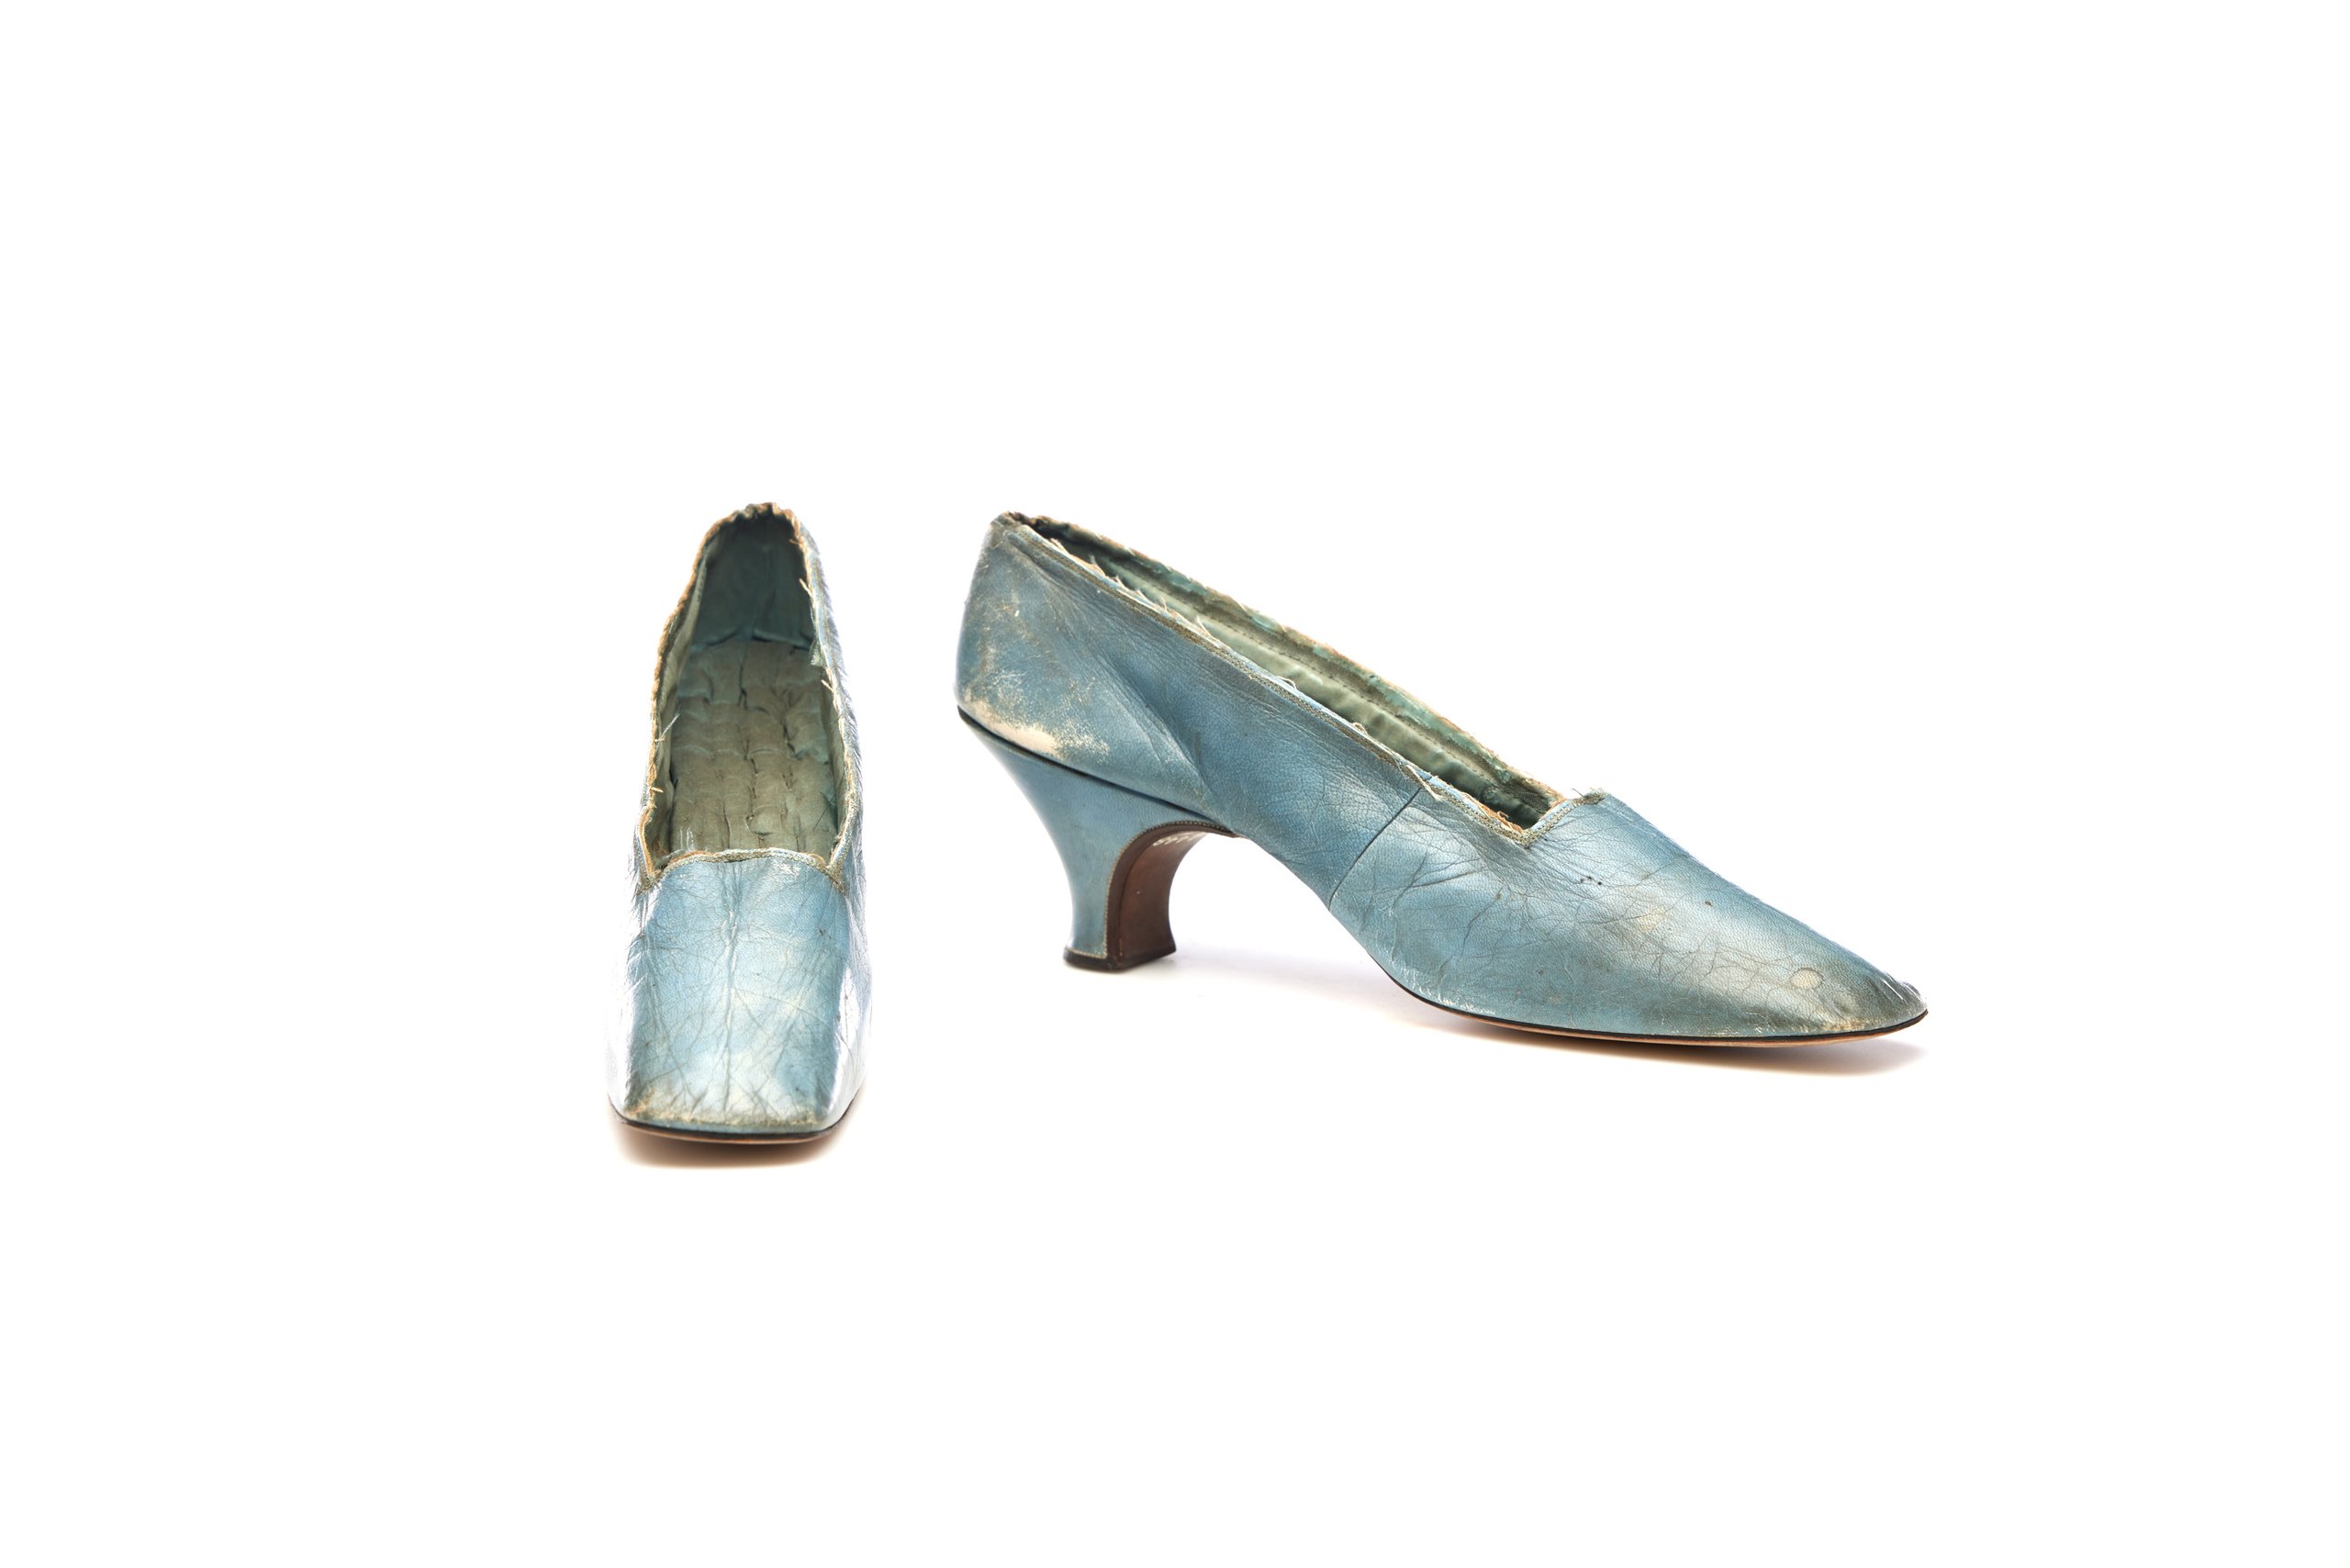 Pair of slip on shoes by Pattison